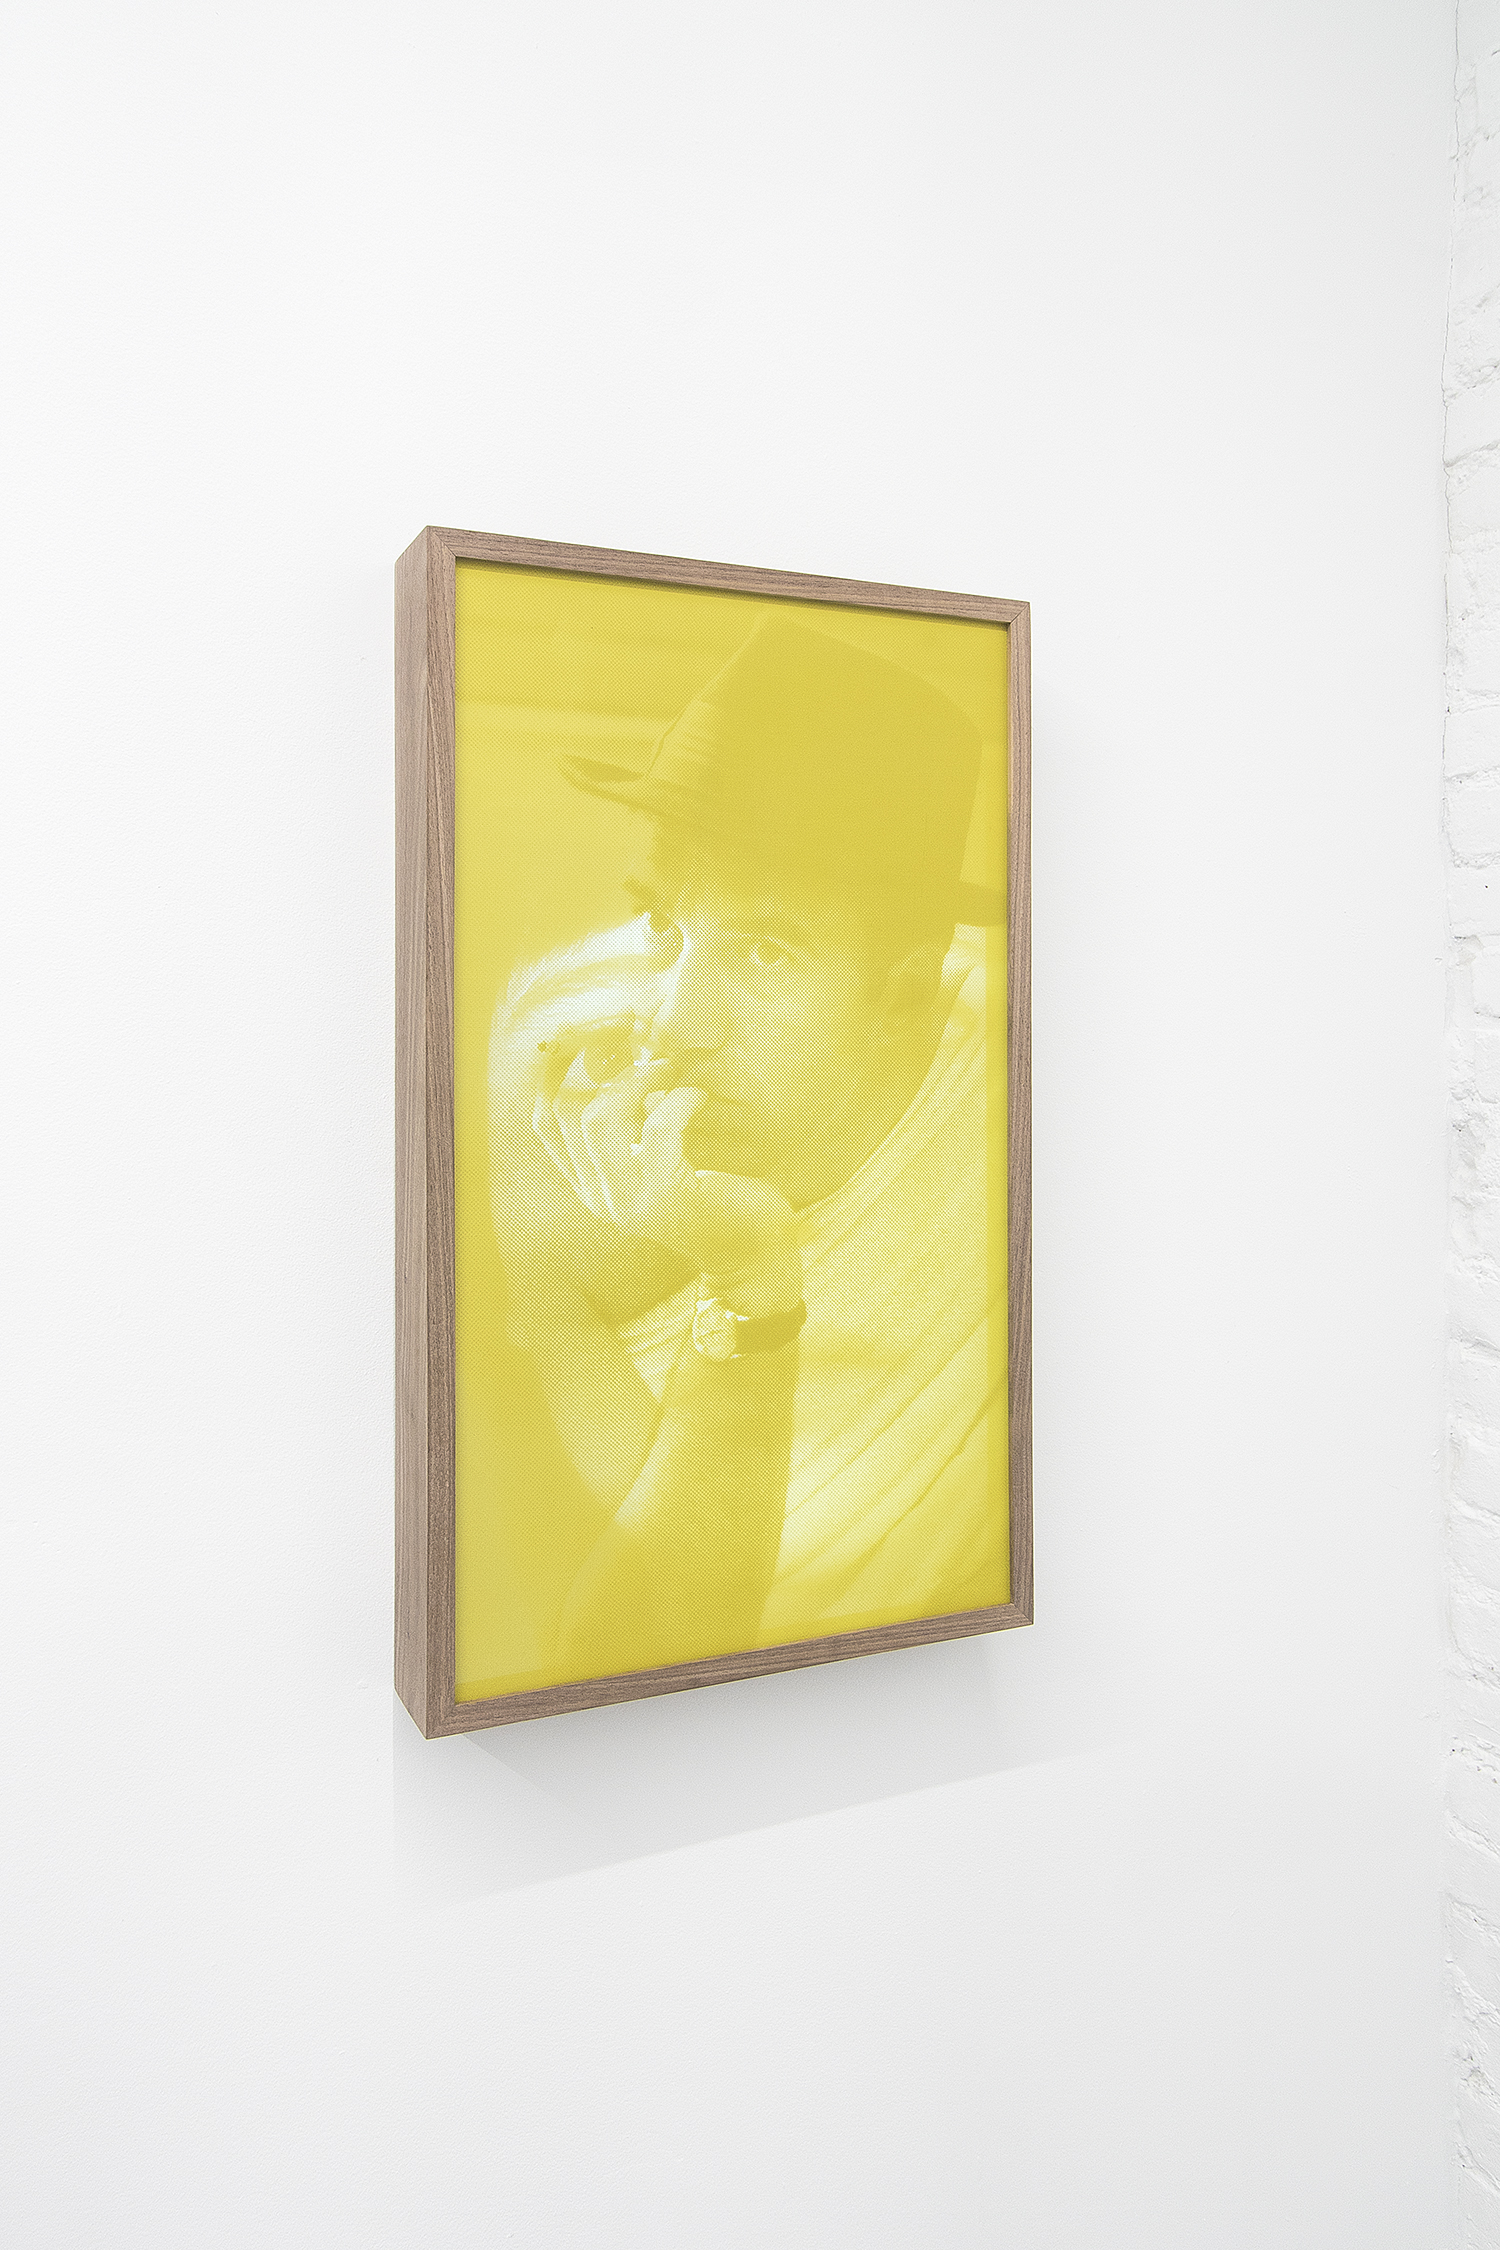   I prefer you blonde. - I prefer you without a hat,  2019  Yellow silkscreen fabric, epoxic silkscreen on plexiglass, 32” professional display and wood. Video: H264, 1920 x 1200px, 11:43 min. loop. 43.2 x 73.6 x 8.5 cm 